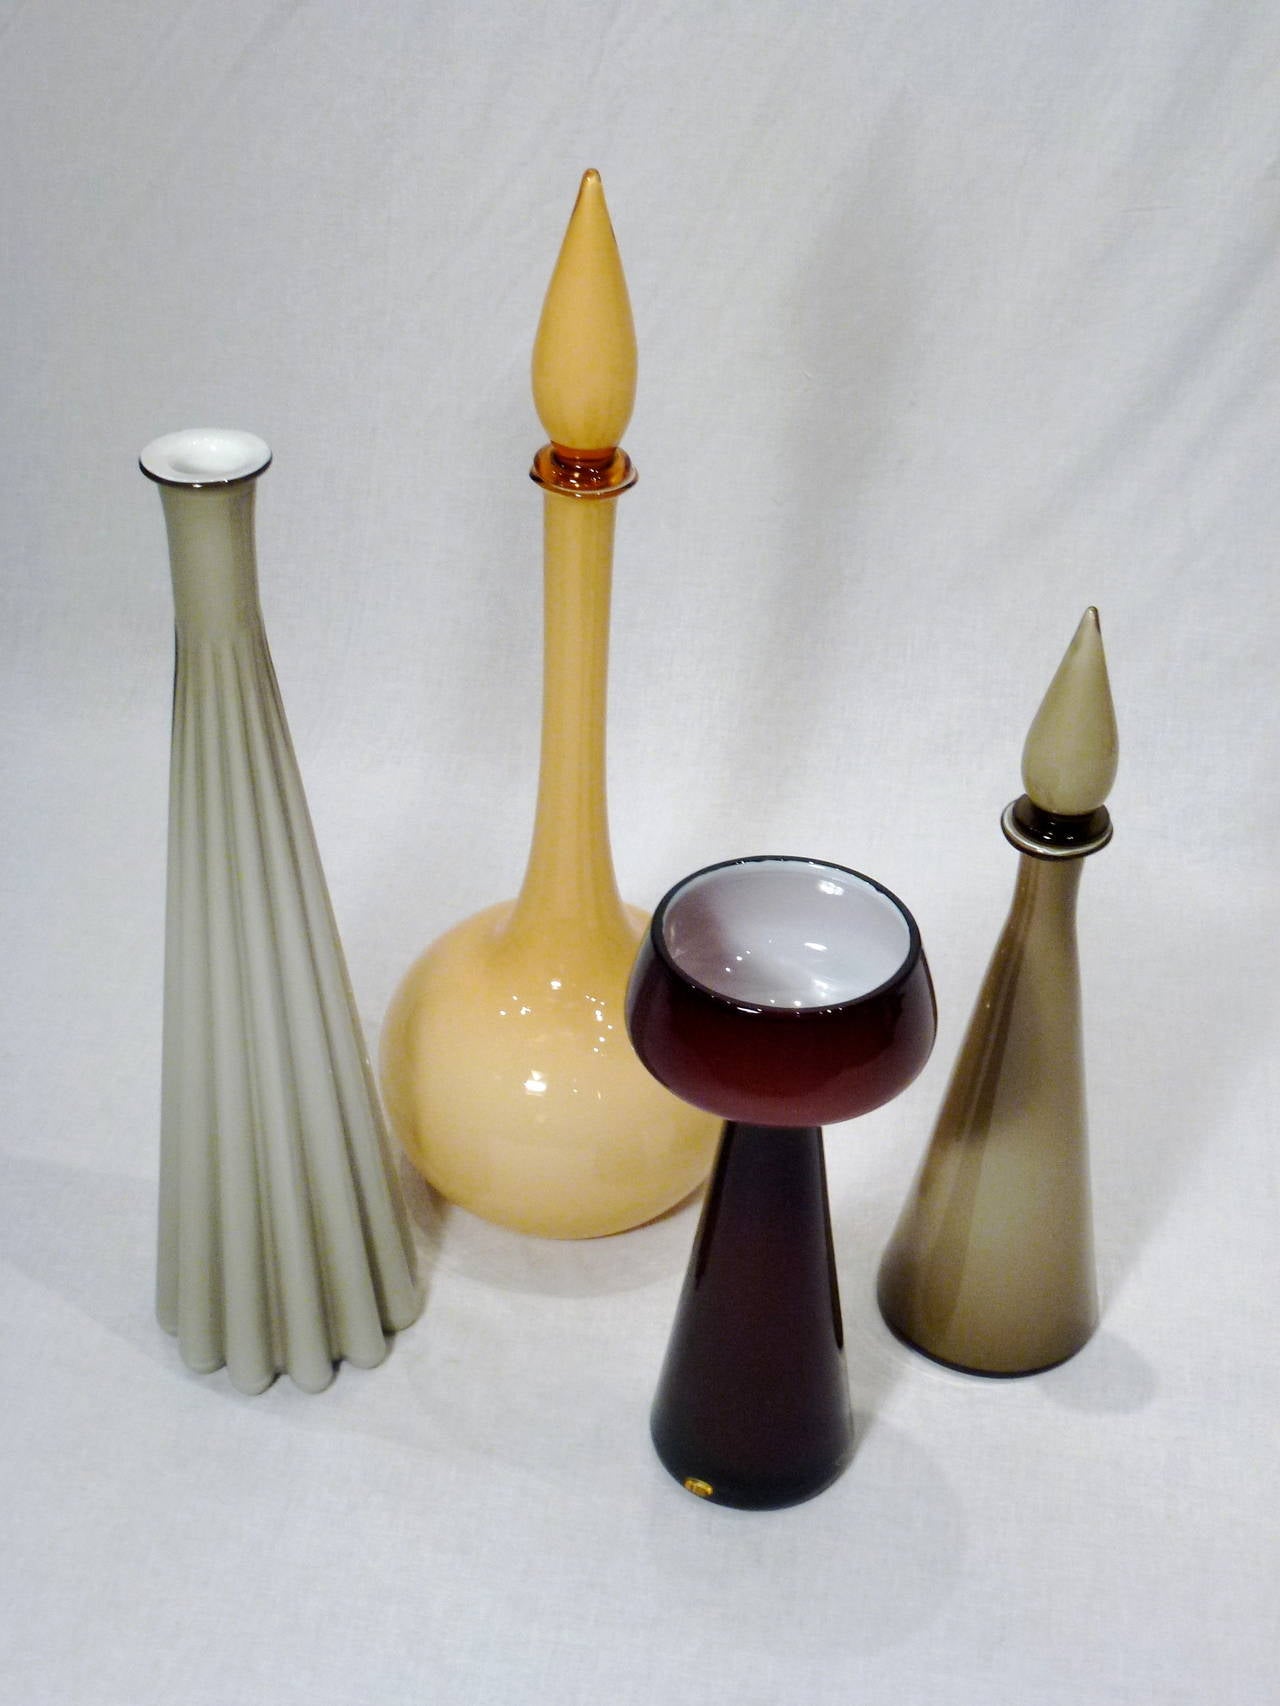 Stunning and diverse set of four Empoli cased glass decanters from Italy. The Technique of layering different color glass is referred to as casing.

Dimensions are for largest decanter. Others are 20